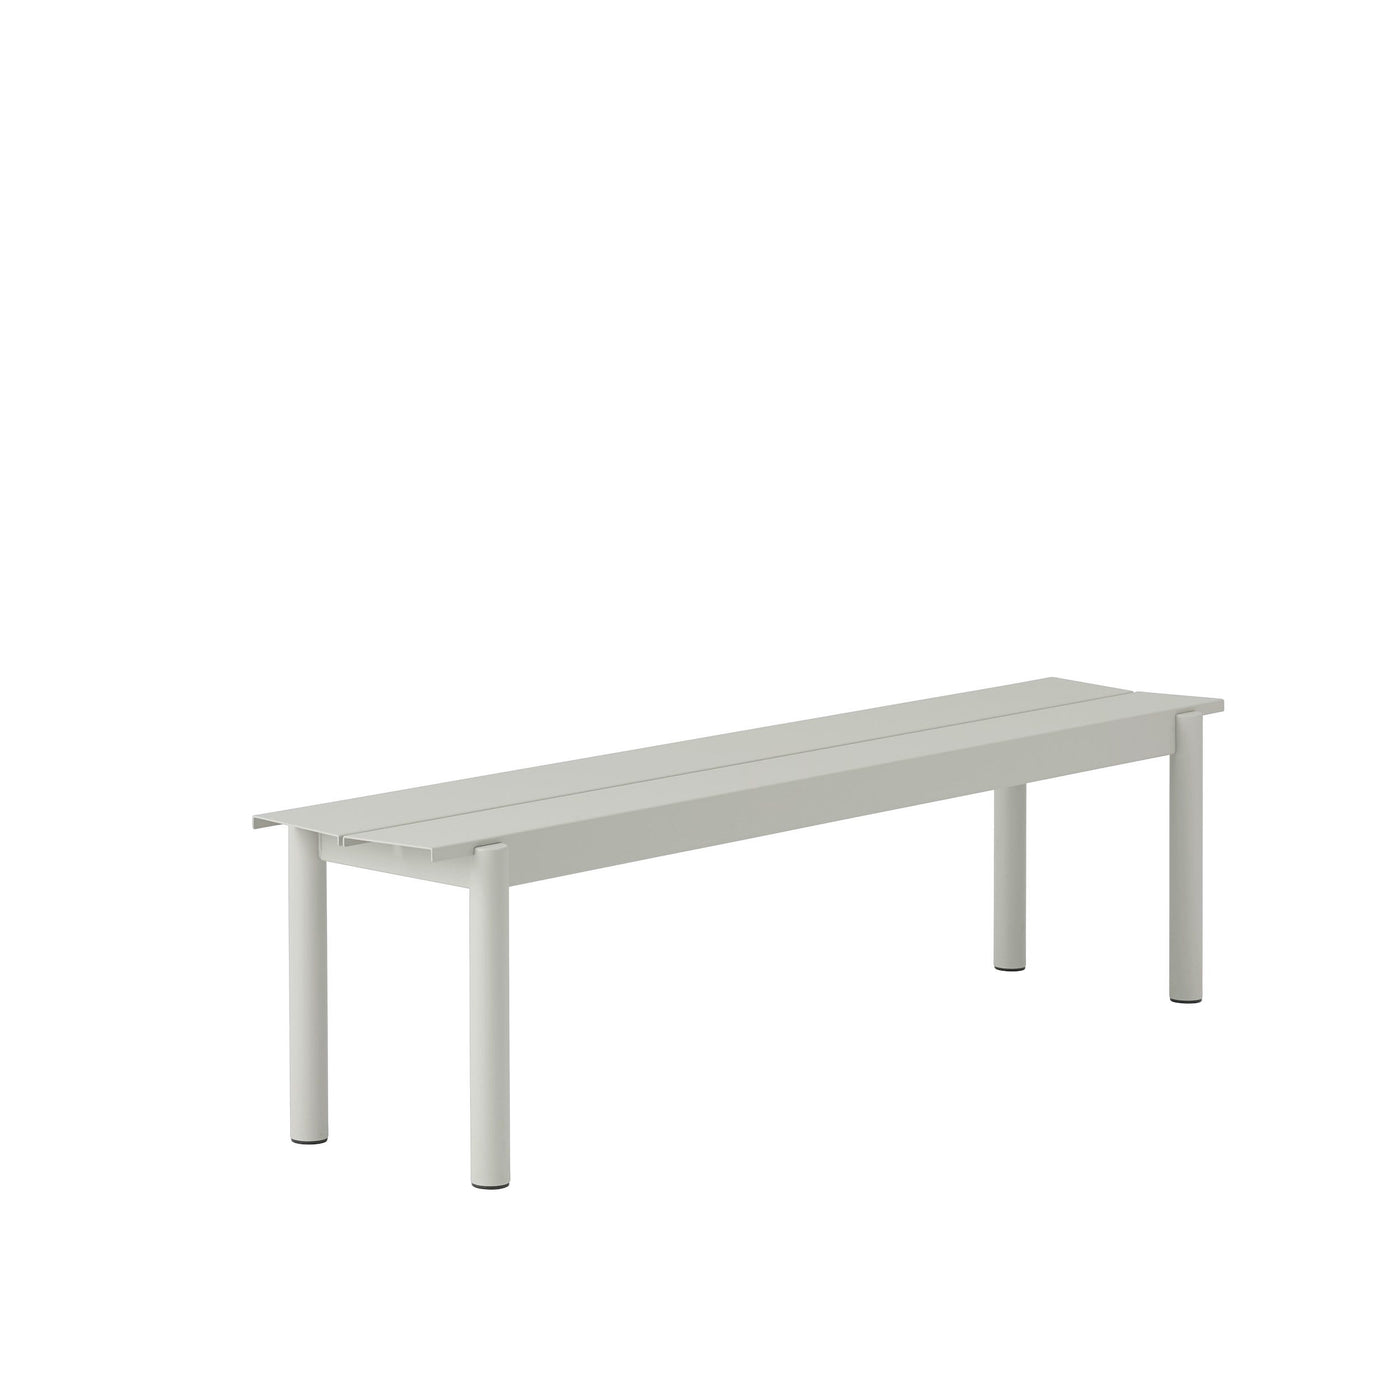 Muuto Linear Steel Bench, 34x170. Outdoor furniture by someday designs. #colour_grey